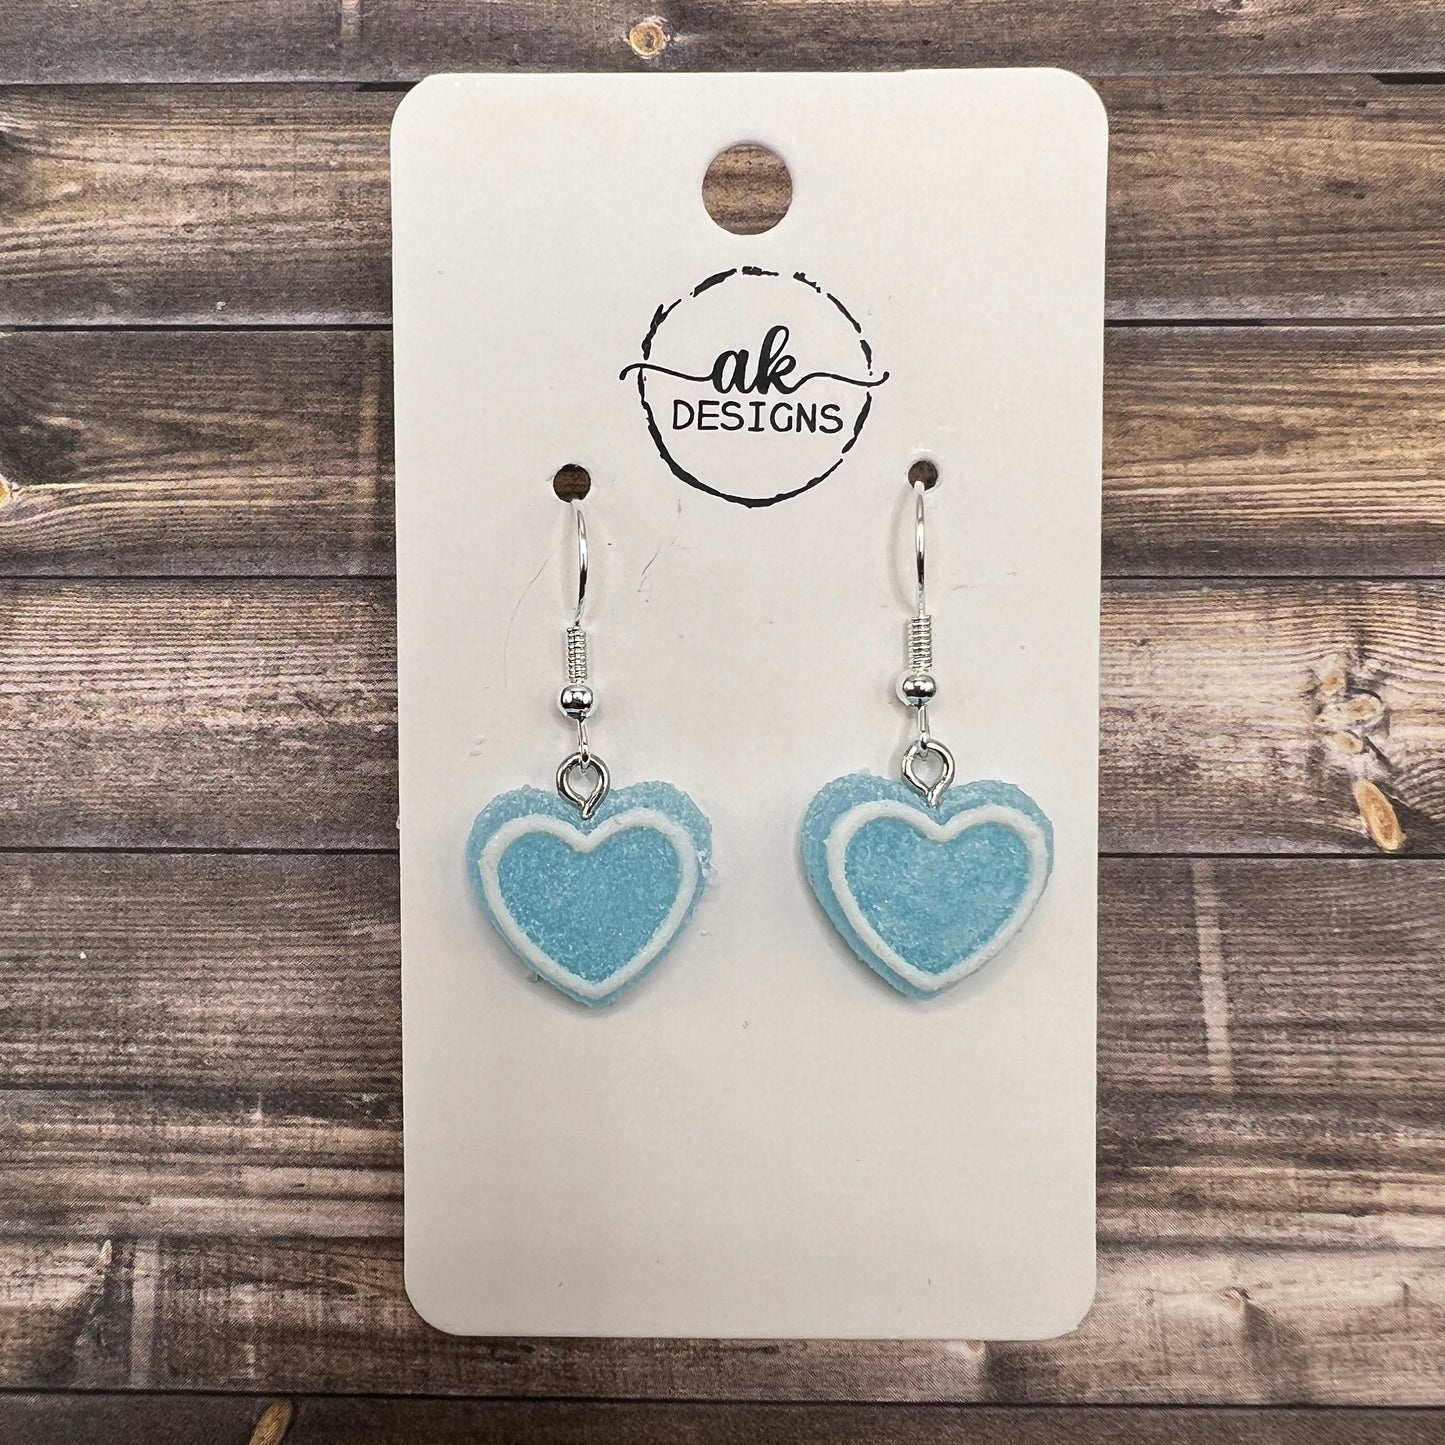 Sugared Candy Heart Petite  Earrings, Hypoallergenic Valentine's Day Love Choice of Color